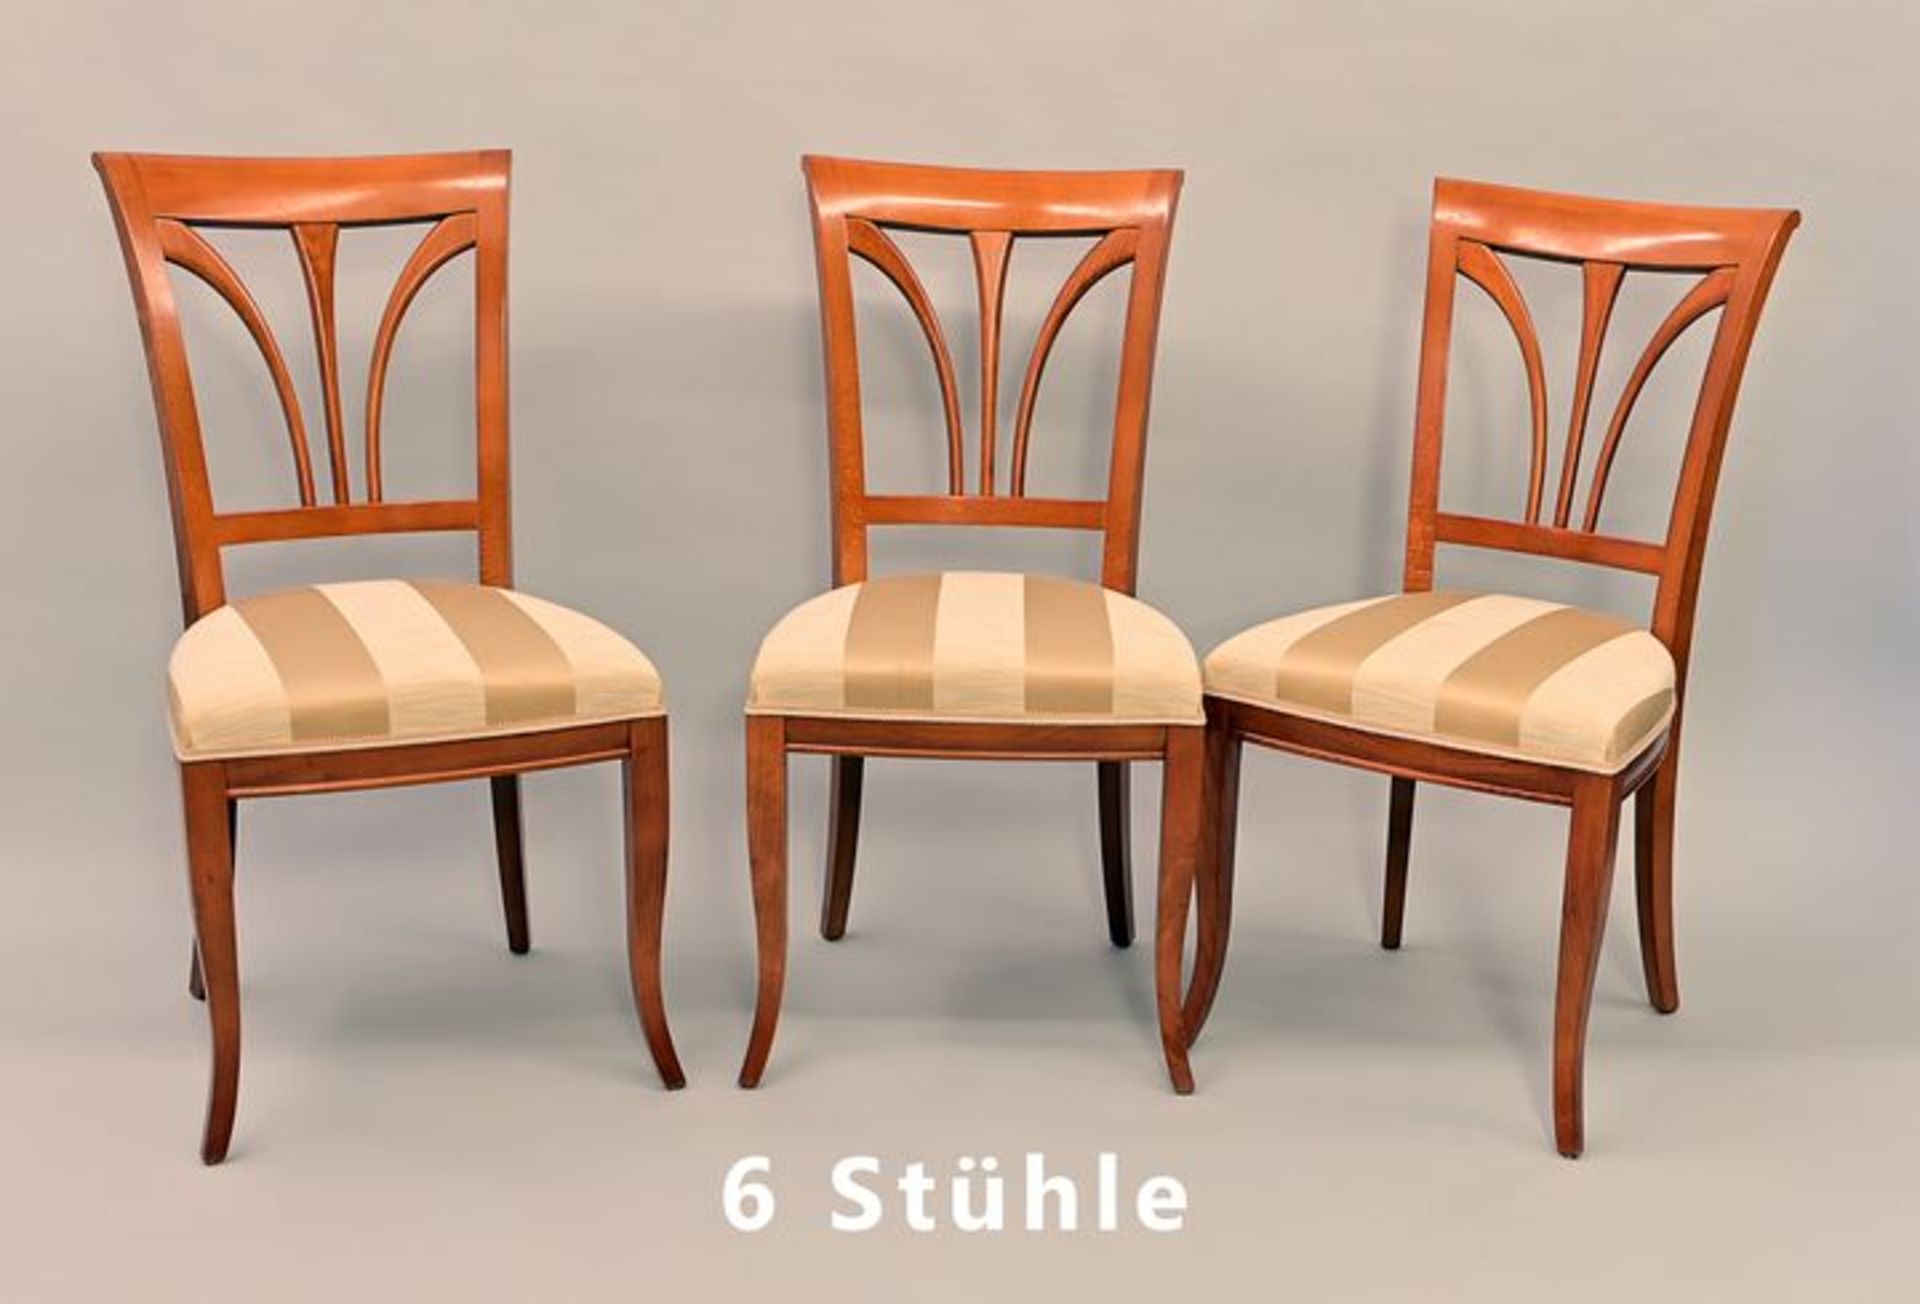 Sechs Stühle / Six chairs